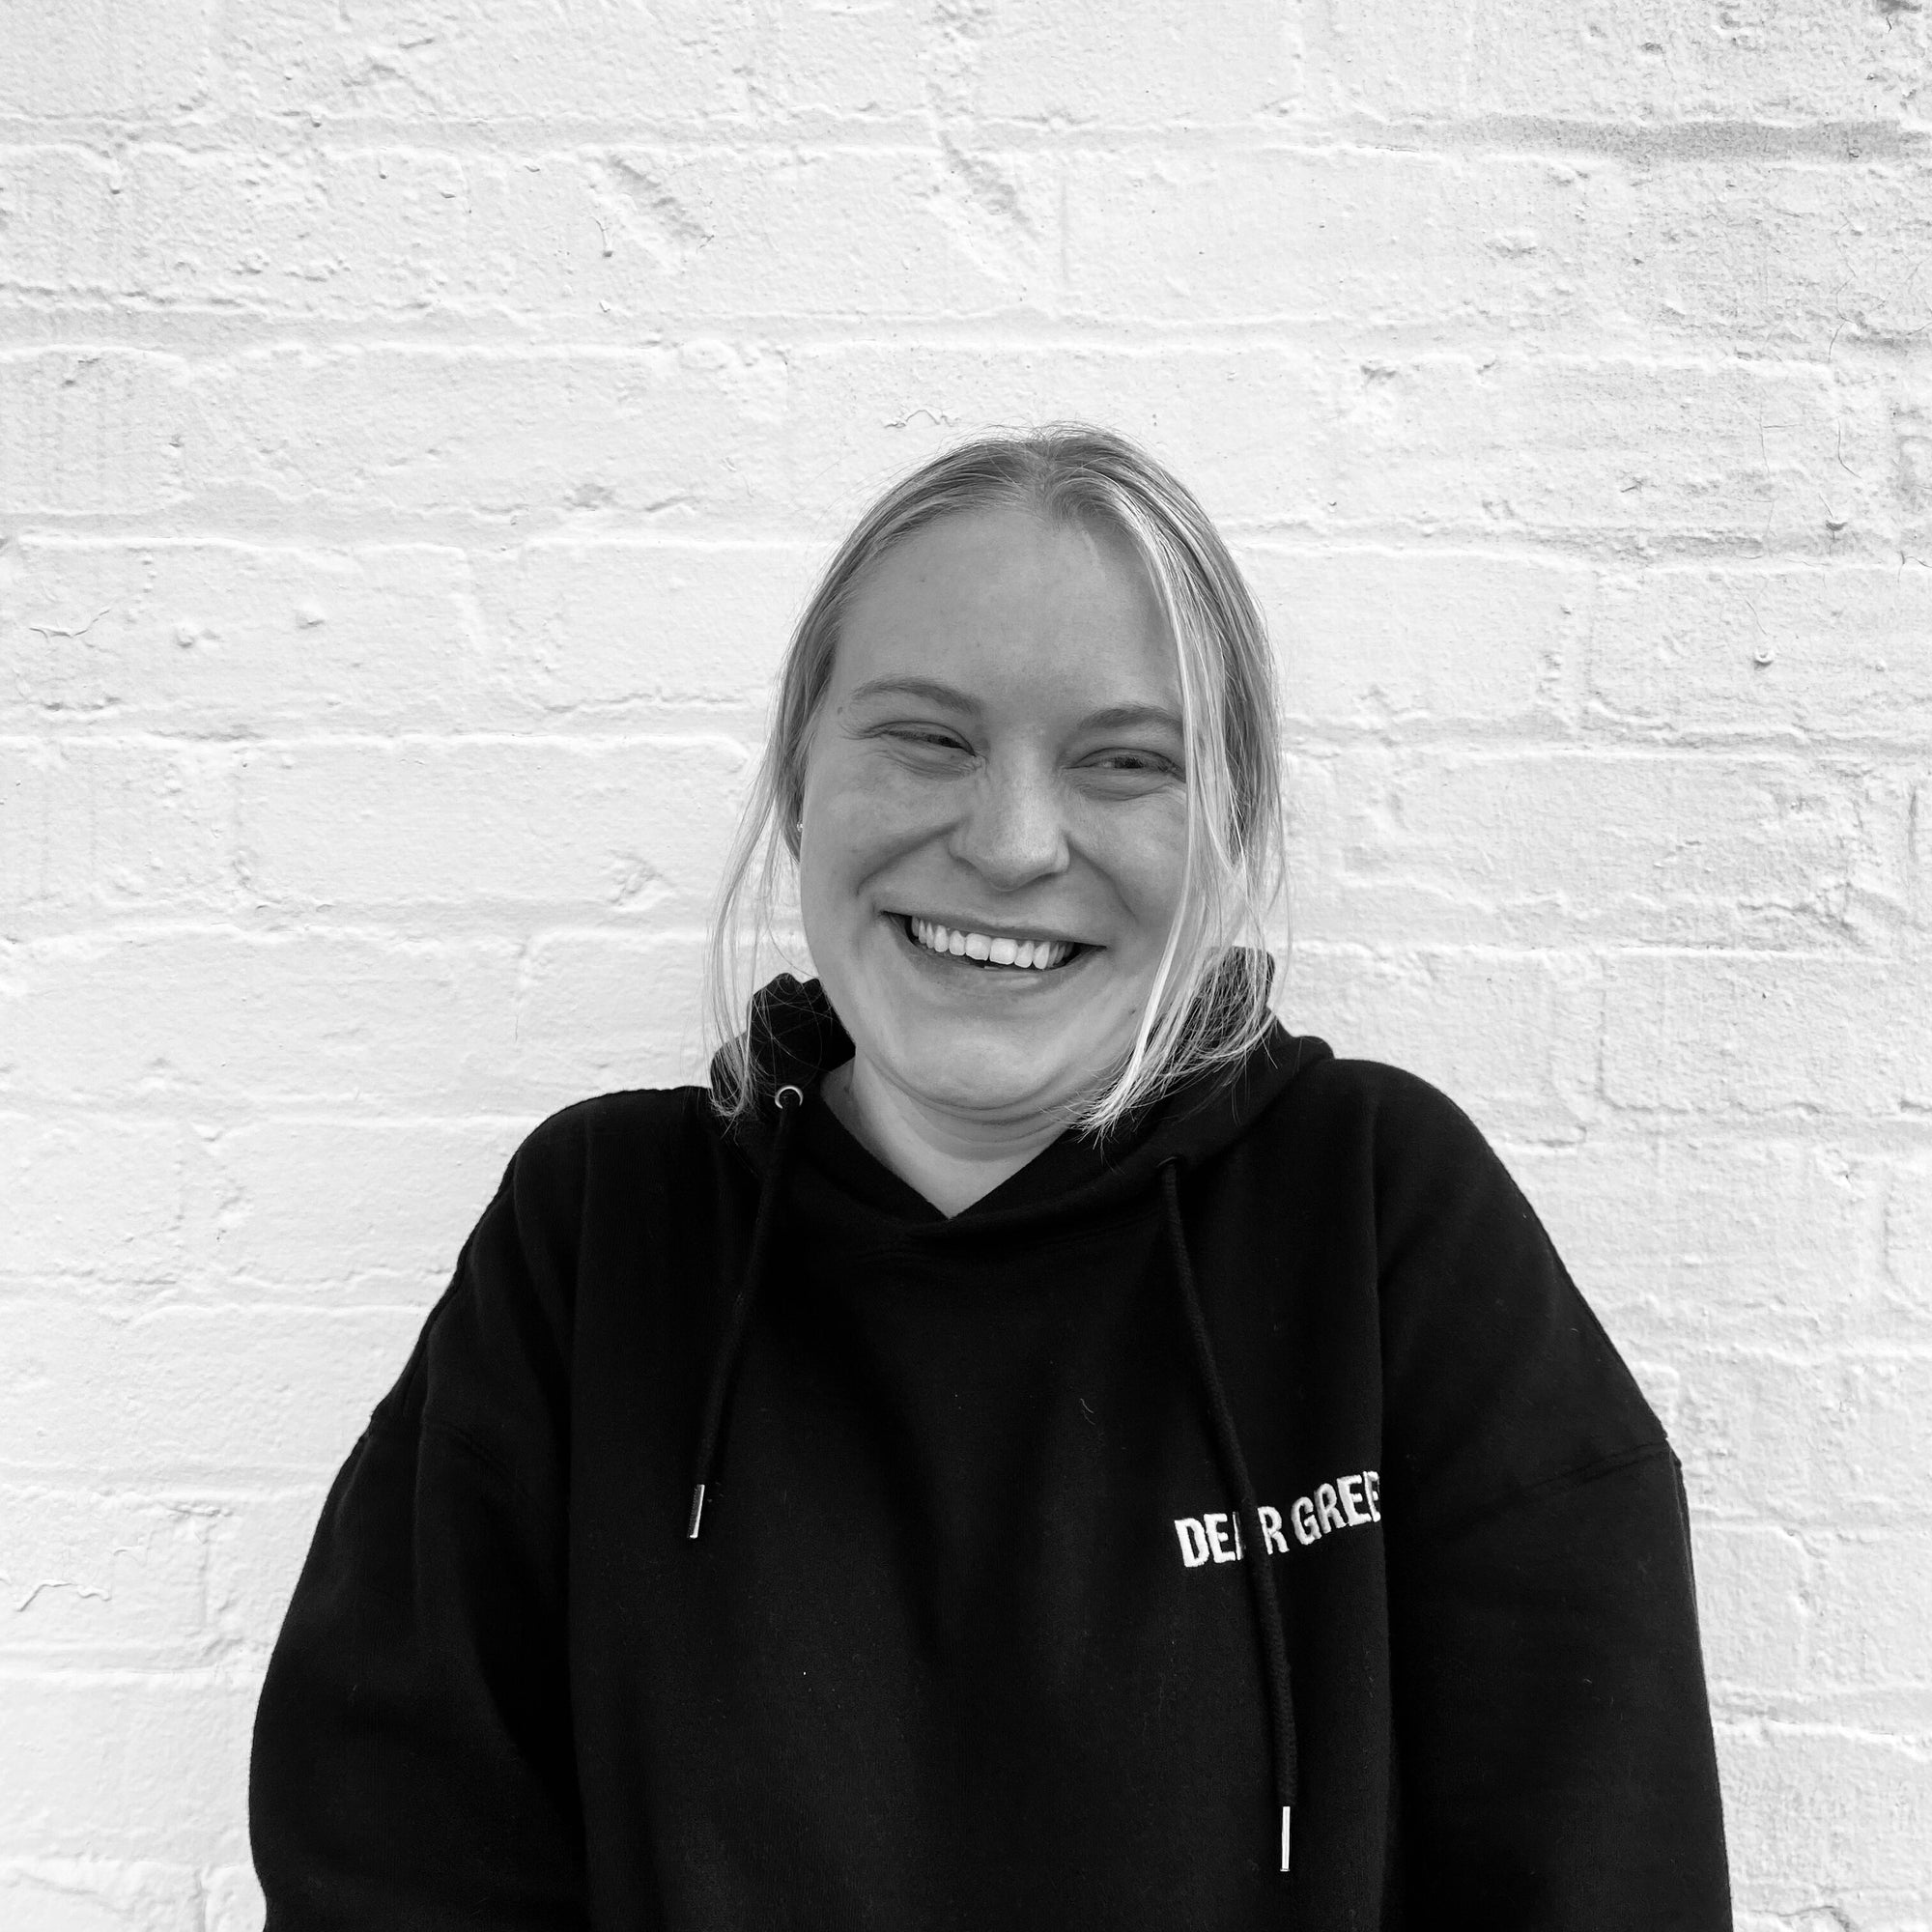 Meet The Team: Stine, Production Manager